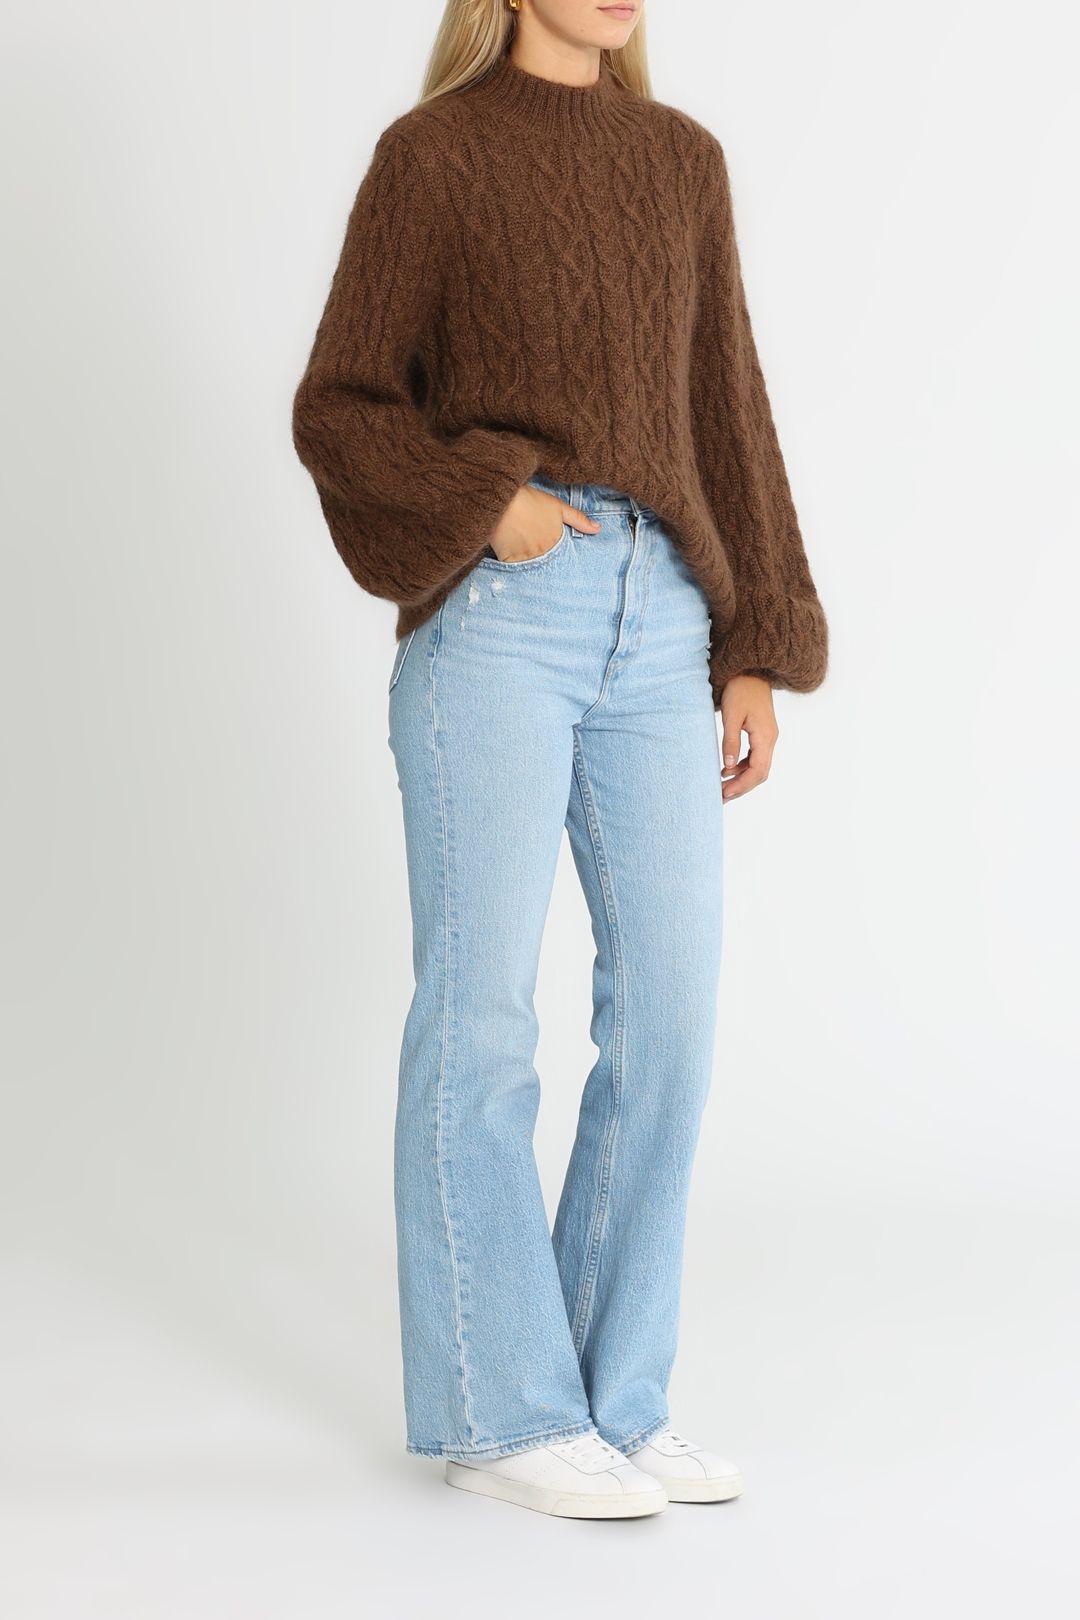 Marle Mimi Crew Neck Long Sleeve Jumper Cable Tobacco Brown